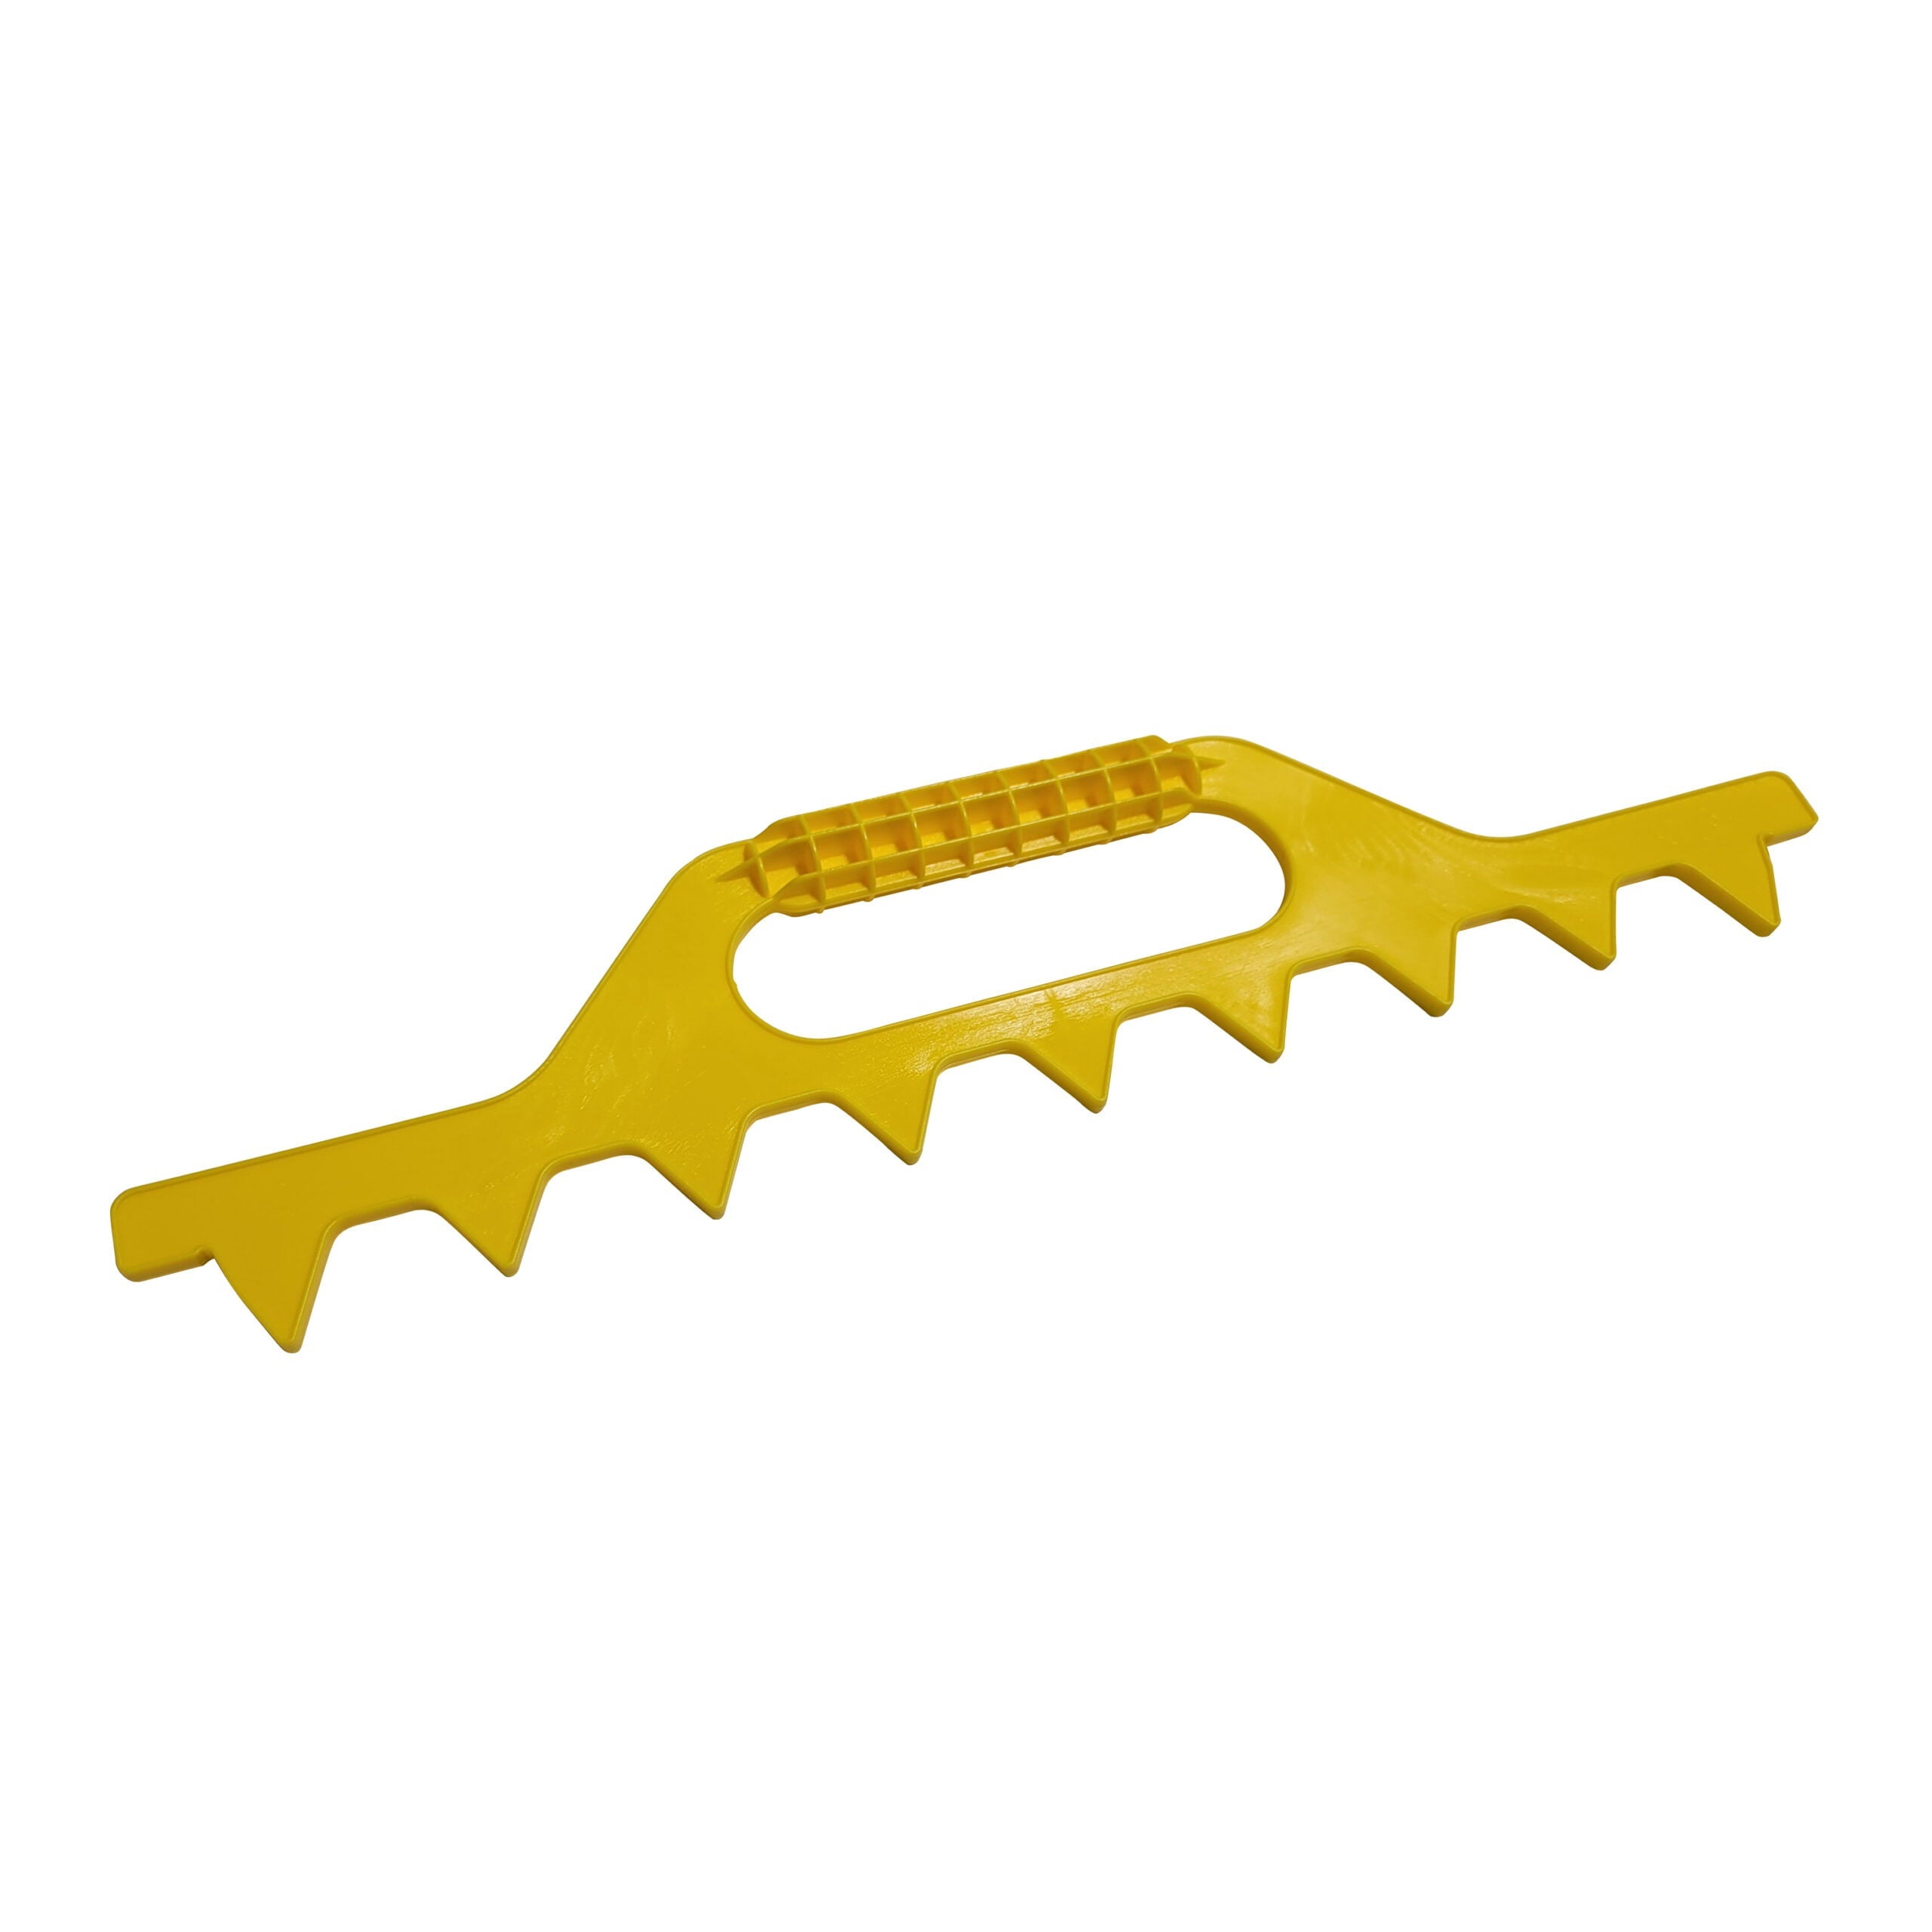 Frame Spacer Tool For beekeeping